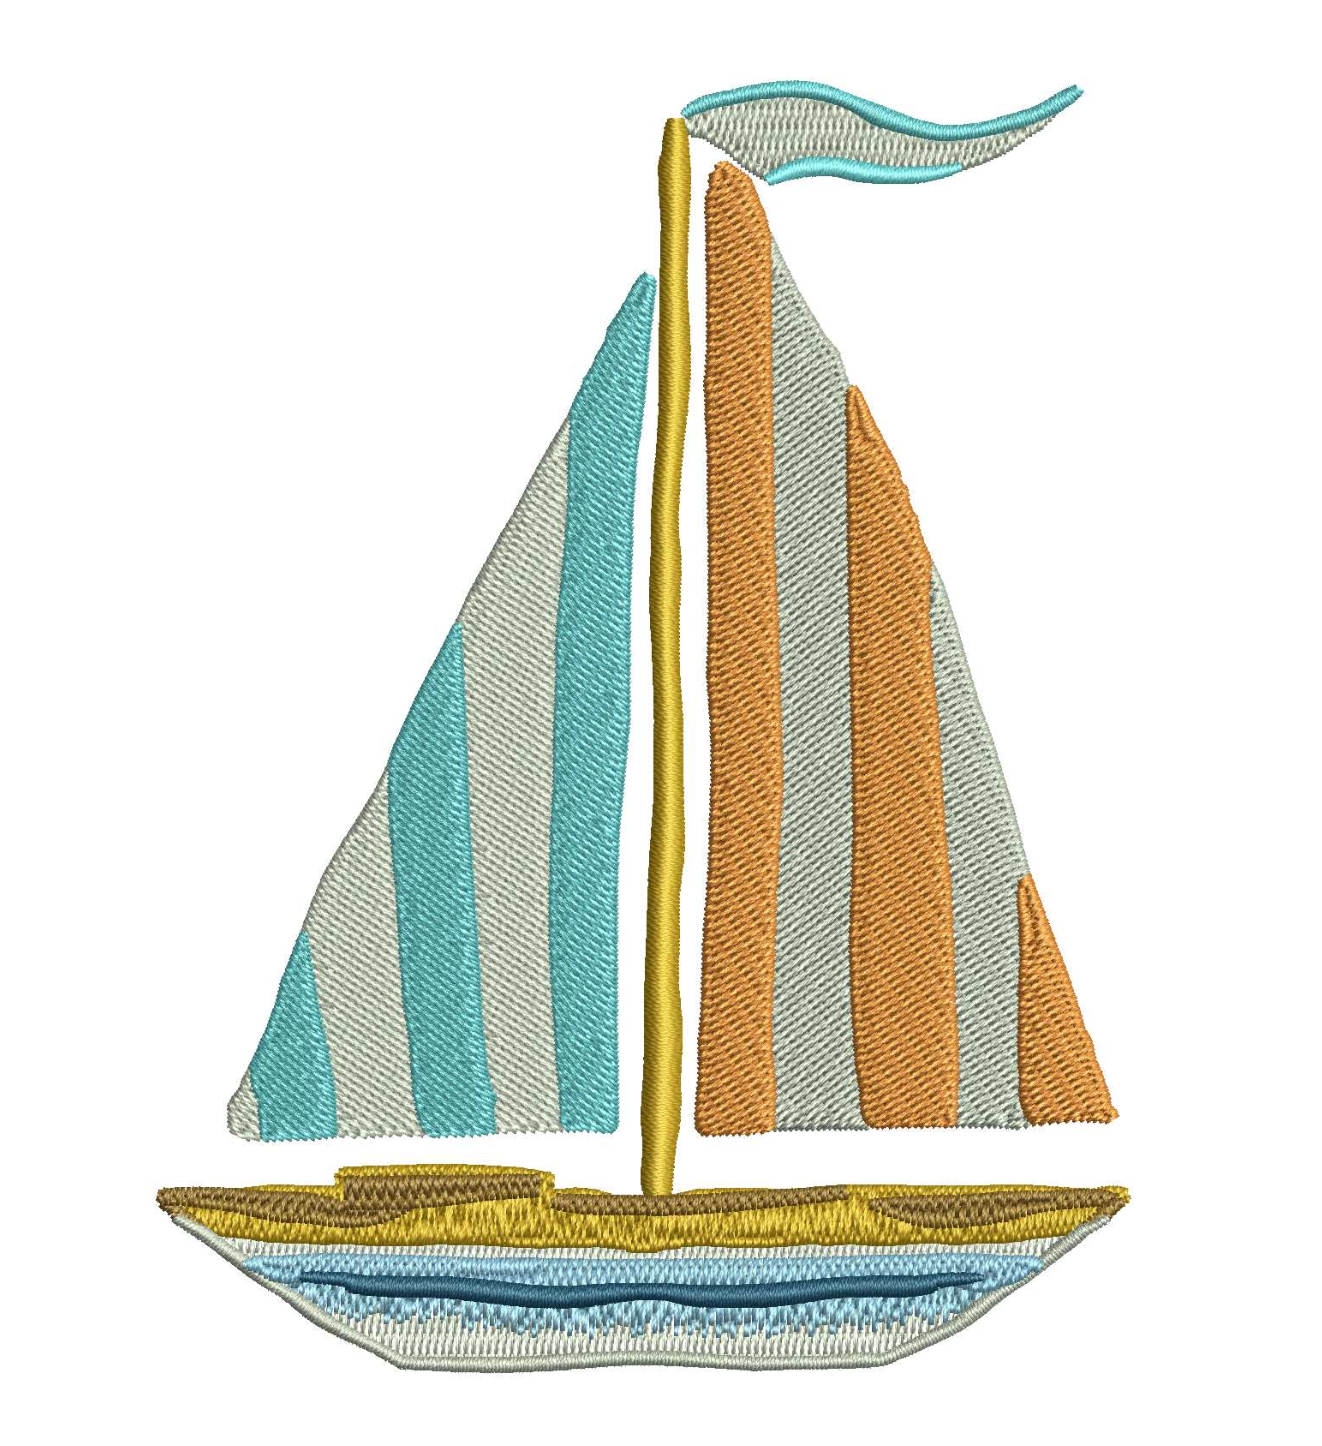 Watercolor Sailboat for Embroidery